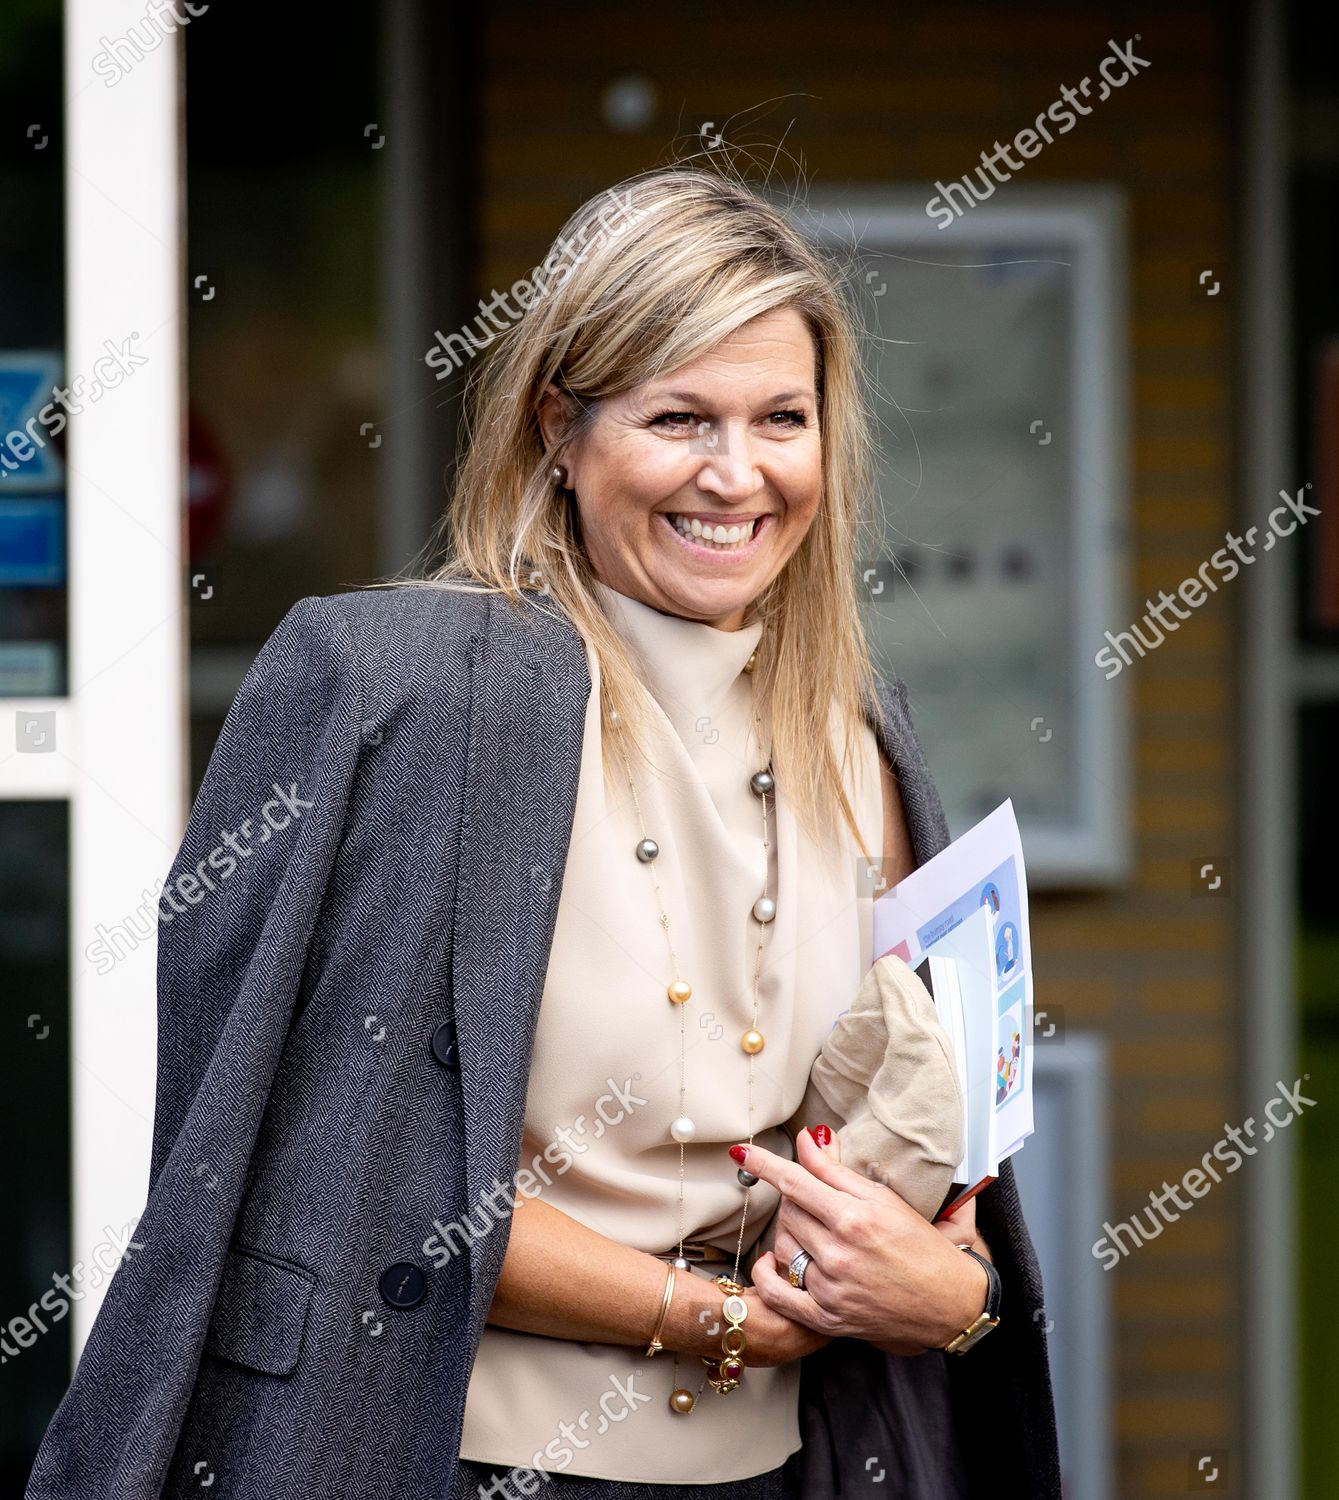 queen-maxima-visit-to-the-parnassia-group-the-hague-the-netherlands-shutterstock-editorial-10675389w.jpg